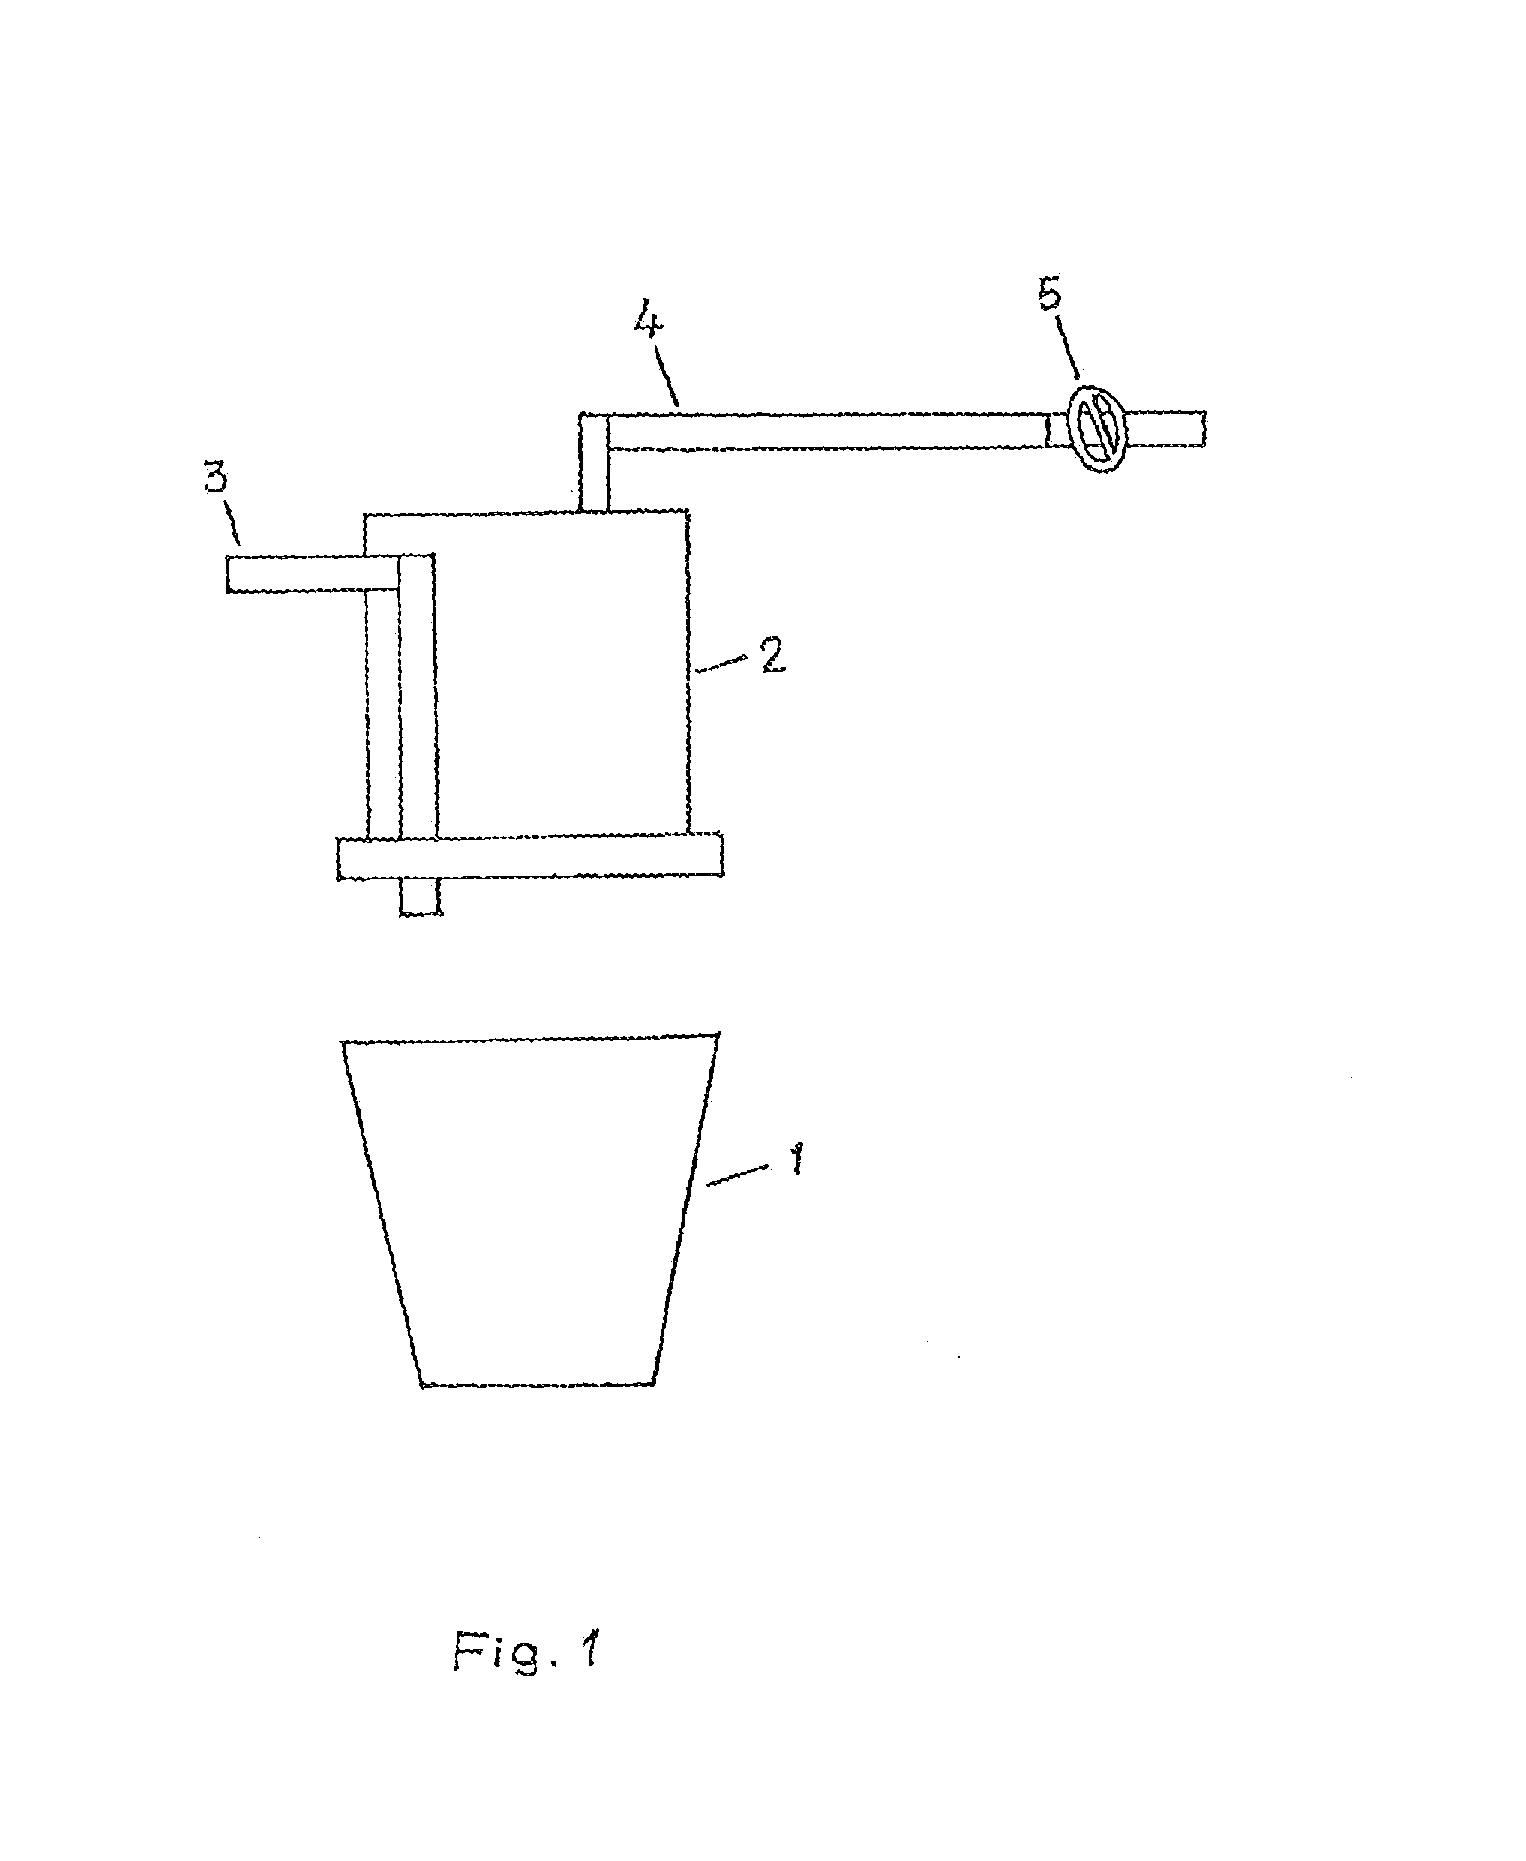 Method for Producing Hydrogen and/or Other Gases from Steel Plant Wastes and Waste Heat